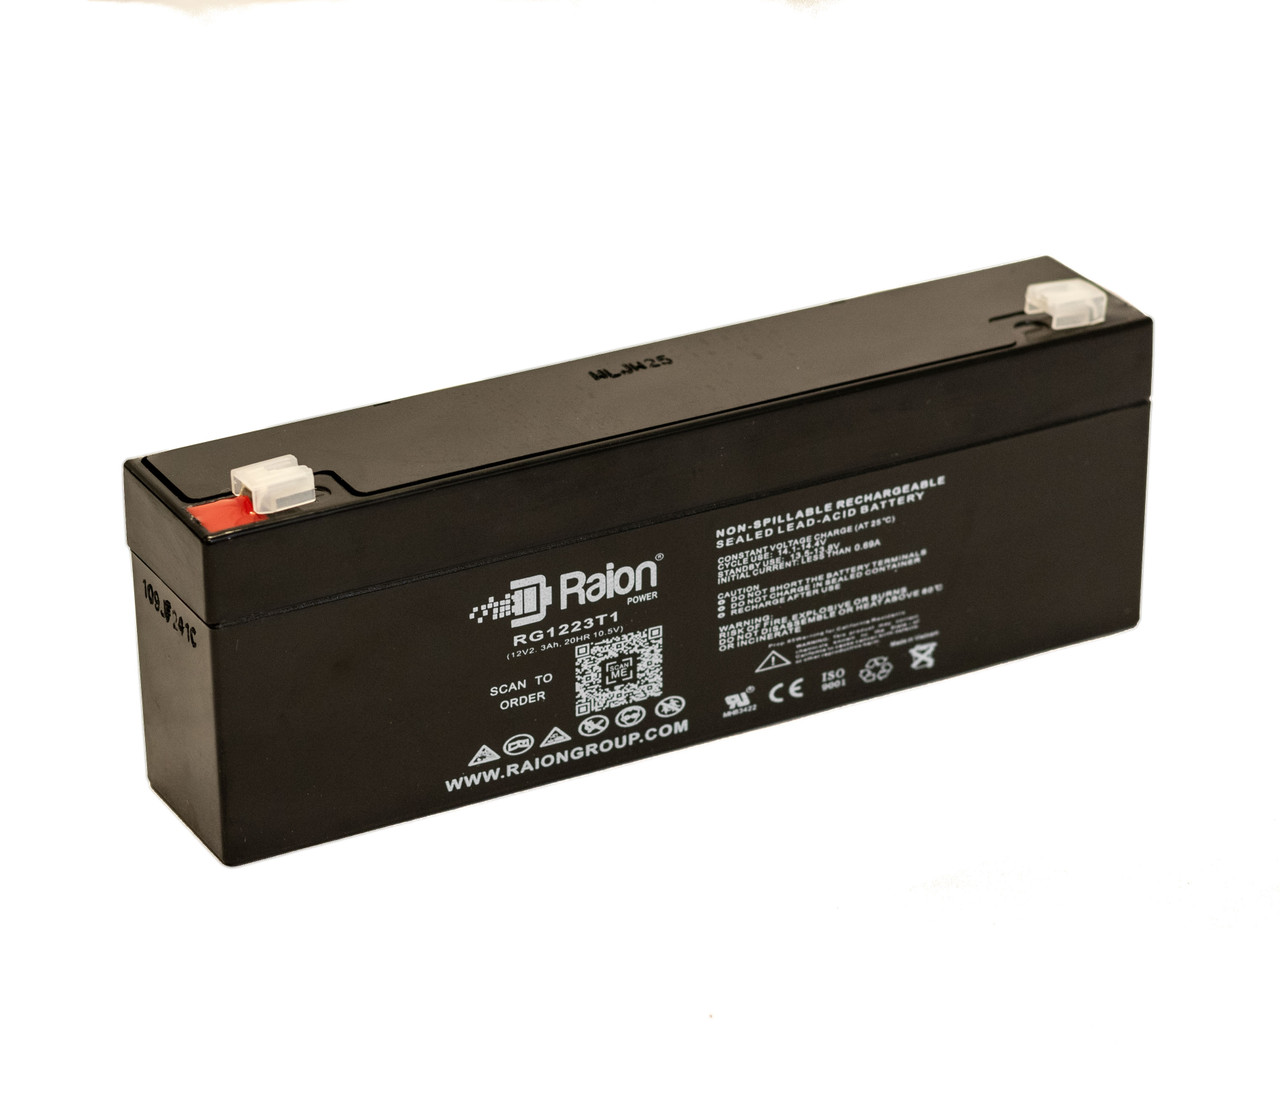 Raion Power RG1223T1 Replacement Battery for Unipower B00222